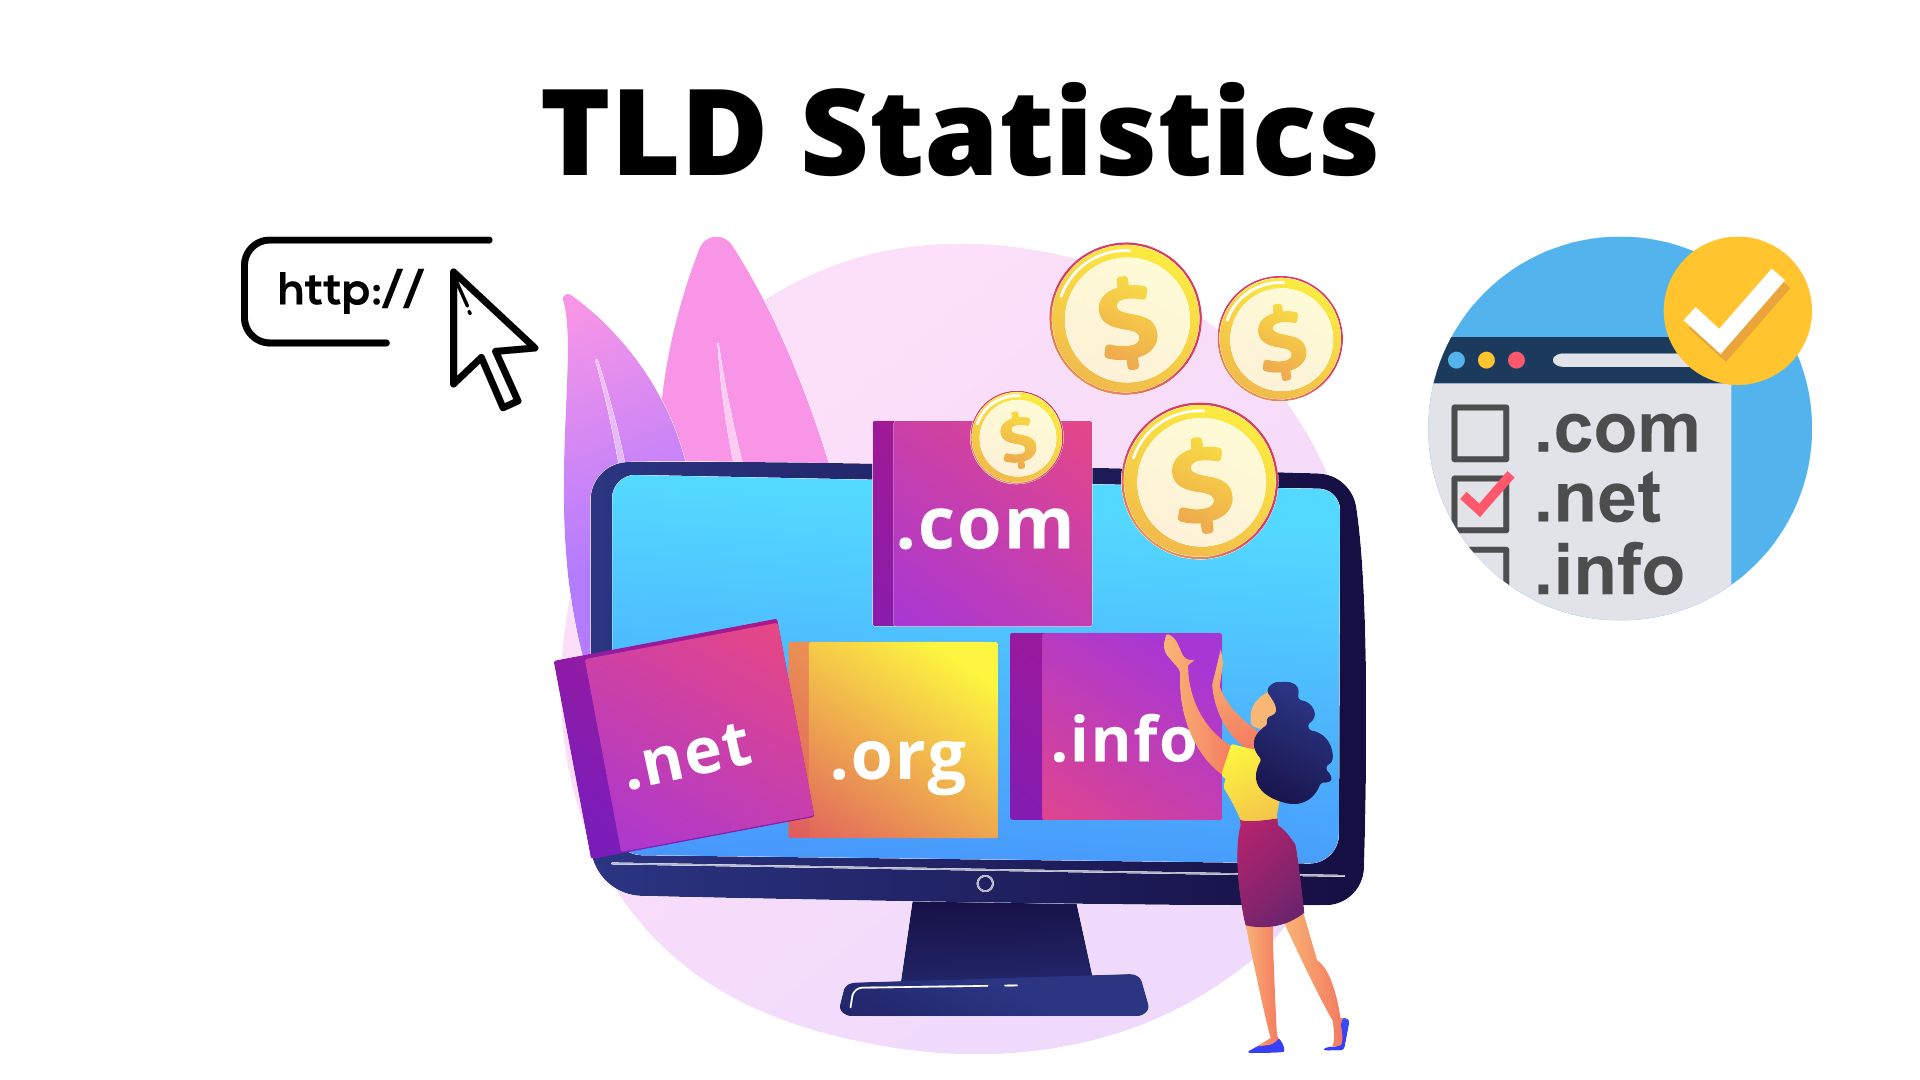 TLD Statistics 2022 – All About Top-Level Domain, Growth and Usage